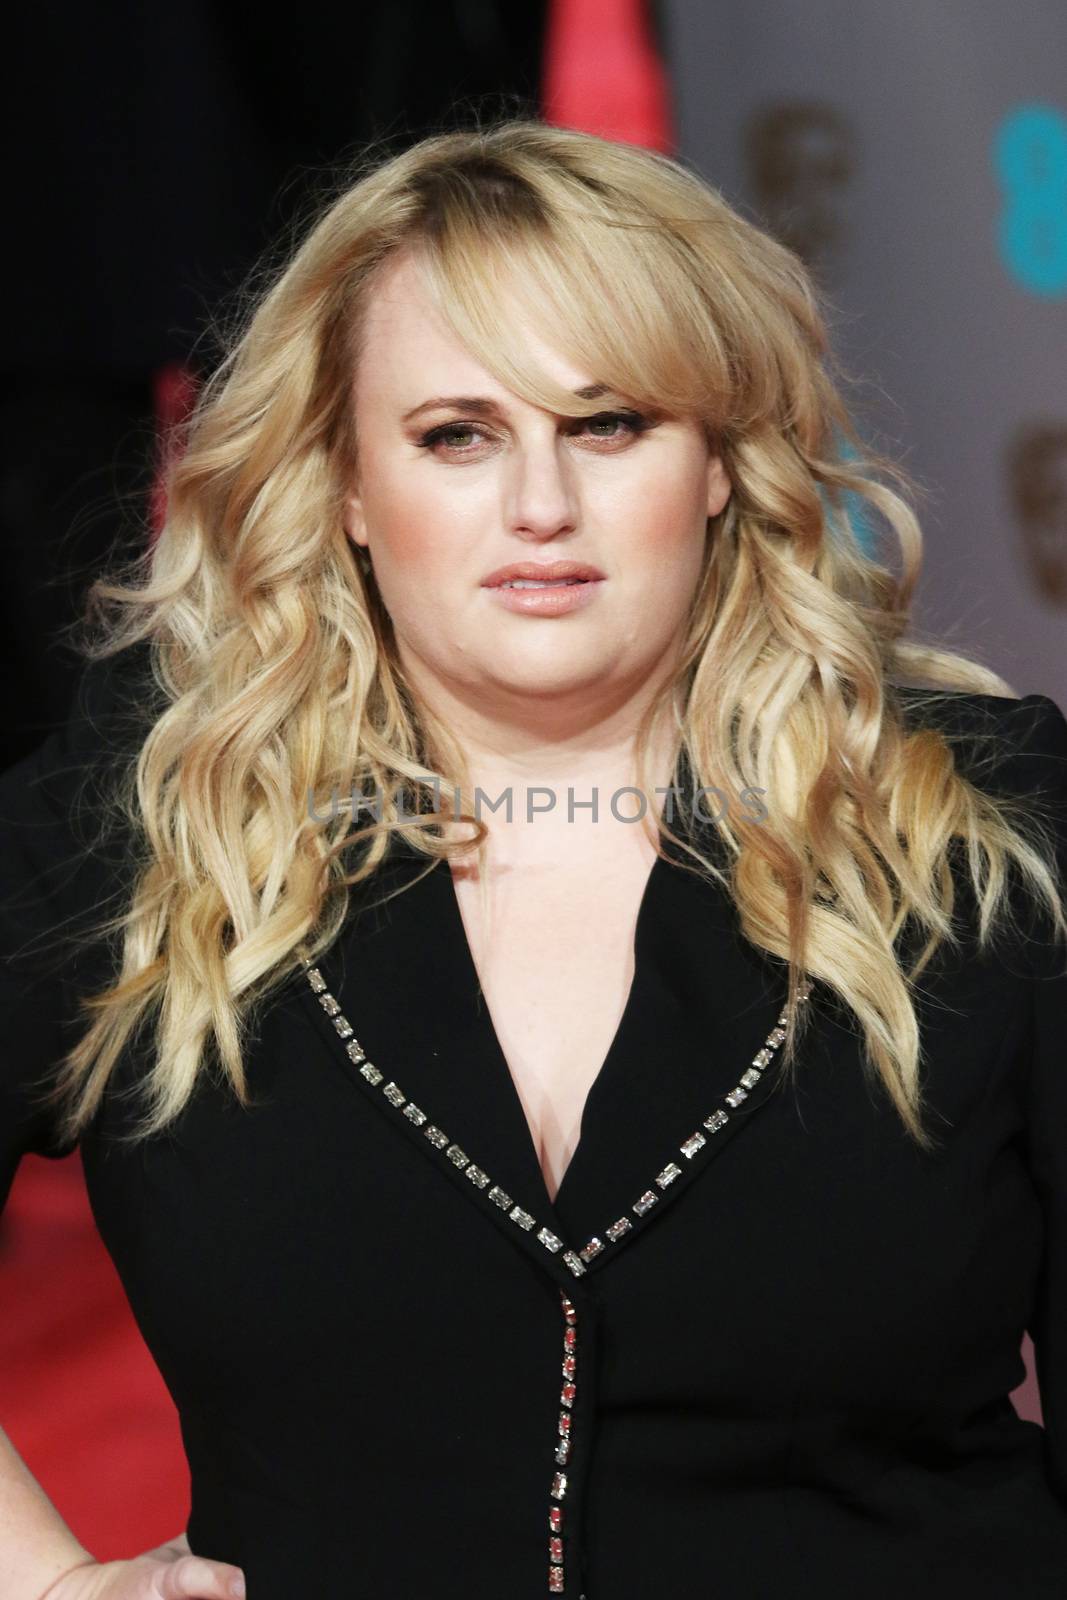 UK, London: Australian actress Rebel Wilson poses on the red Carpet at the EE British Academy Film Awards, BAFTA Awards, at the Royal Opera House in London, England, on 14 February 2016.